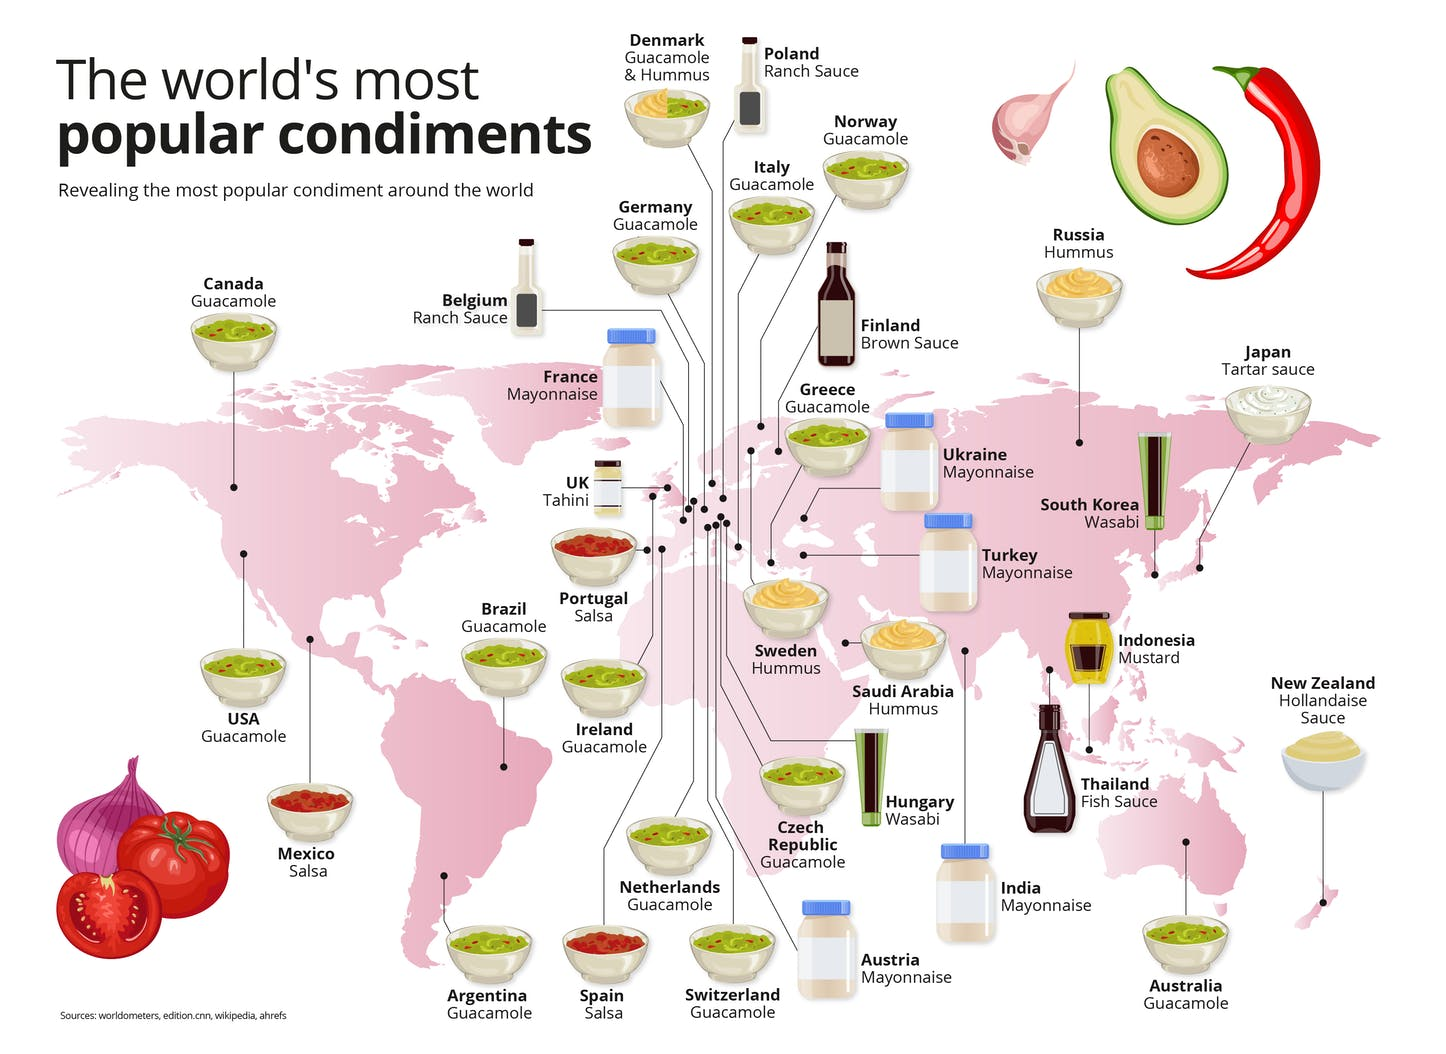 Map of the world listing tons of countries' most popular condiment as guacamole